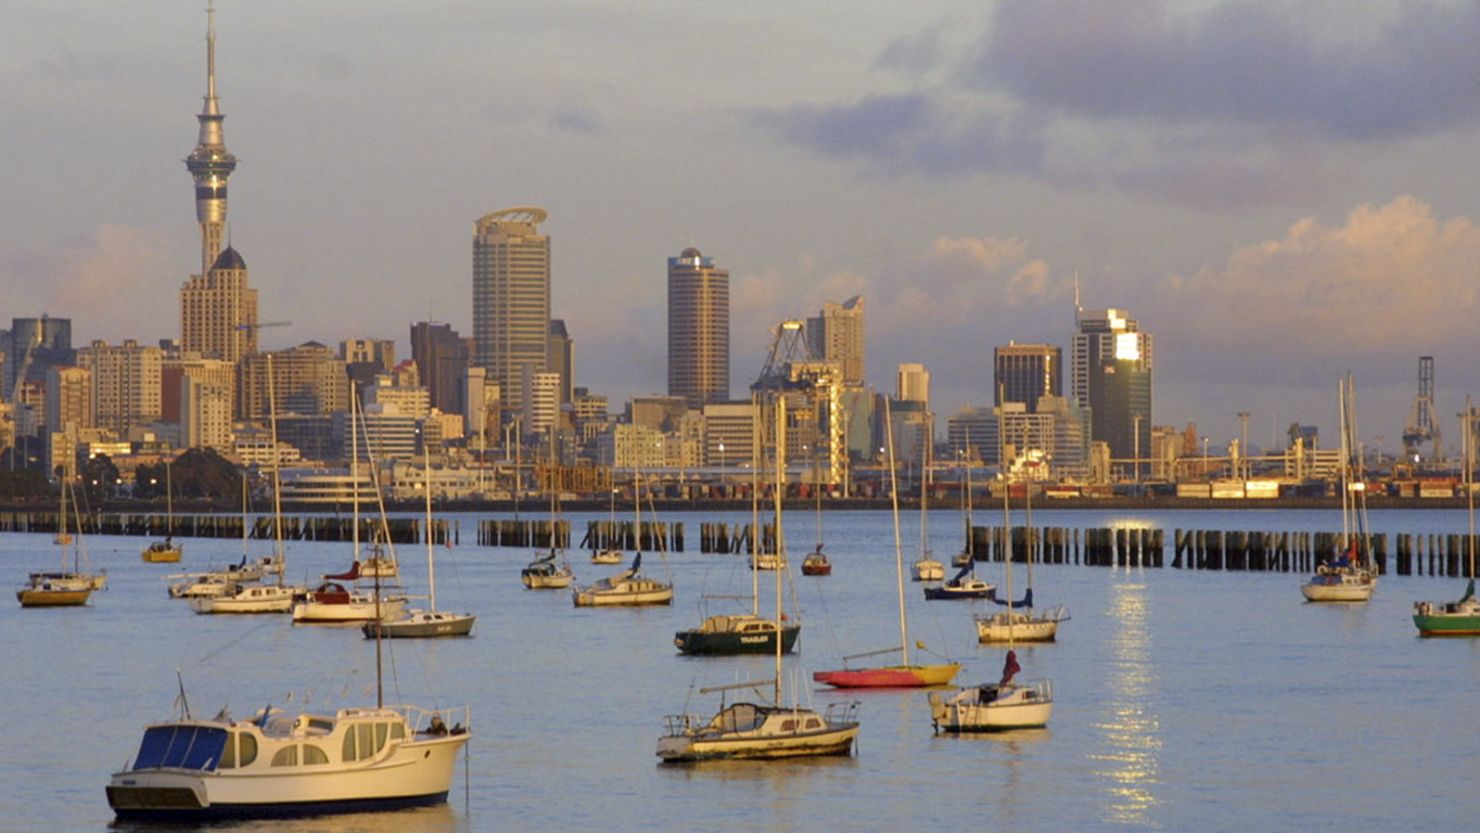 Auckland's maritime tradition still exerts a profound influence on the soul of the city.